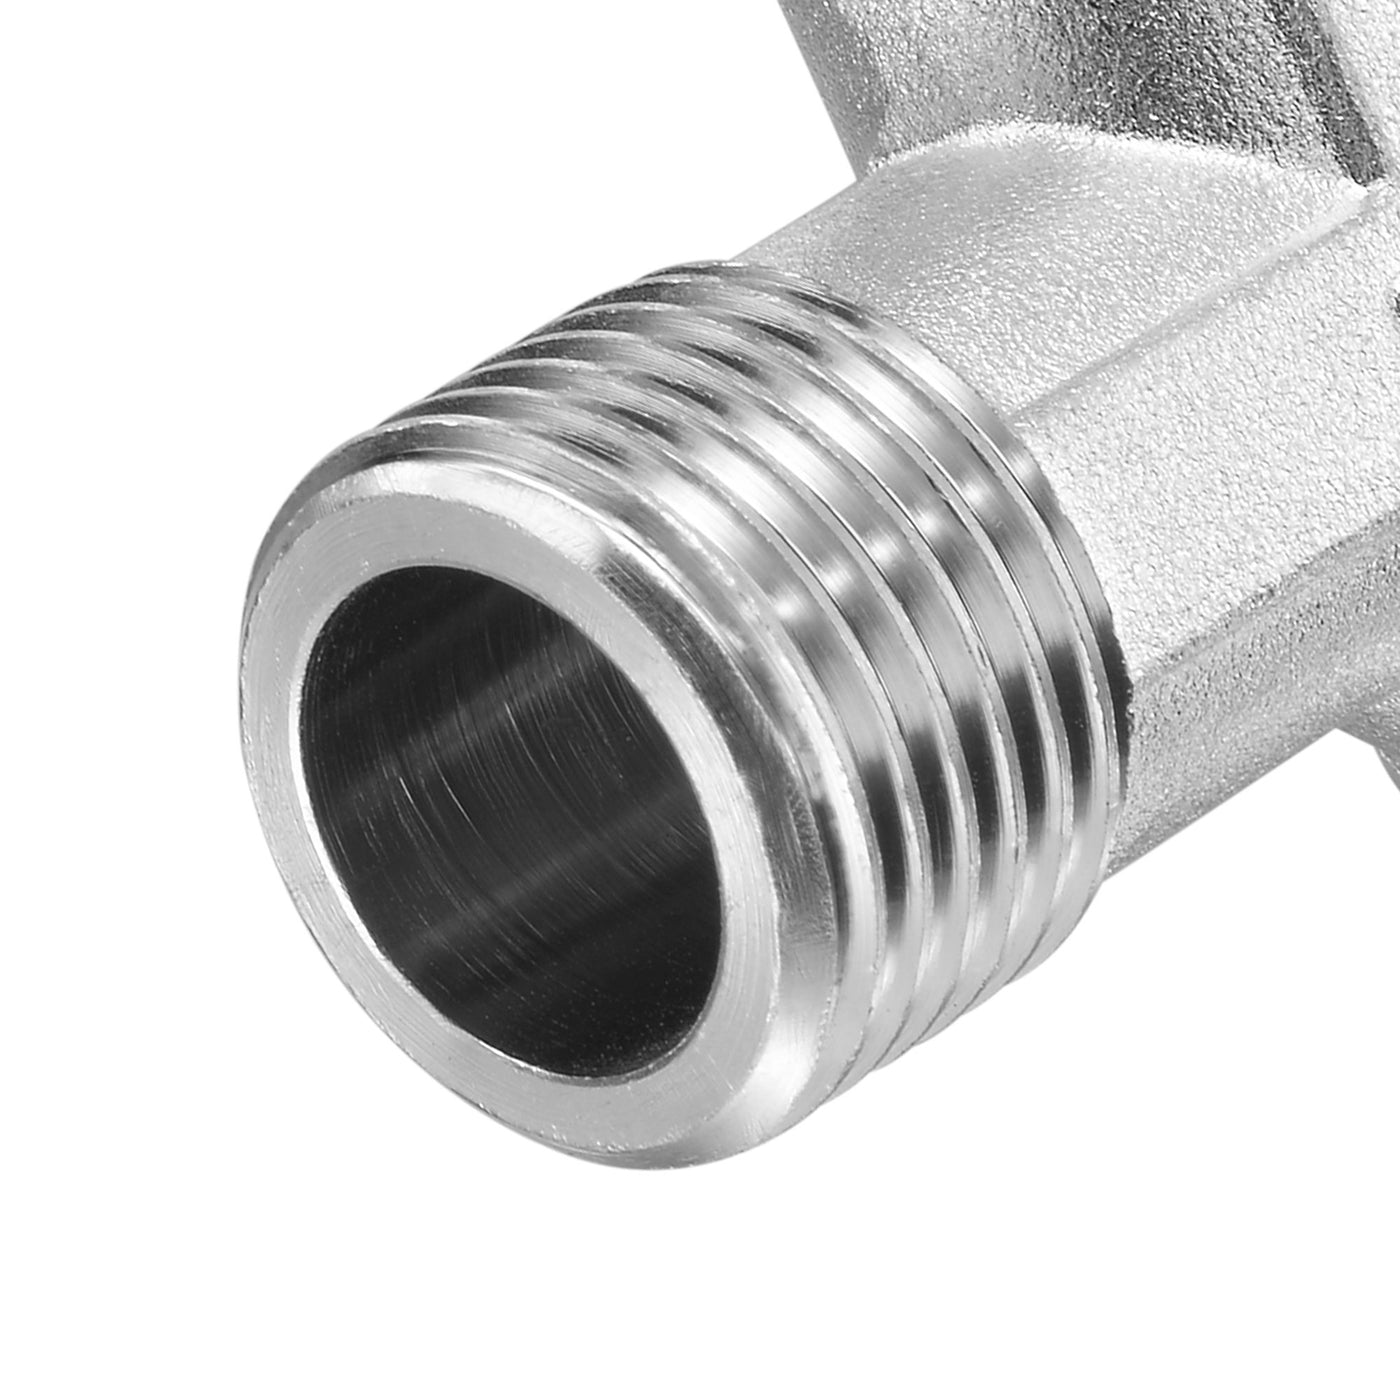 uxcell Uxcell Pipe Fitting G1/2 Male Thread Y Shape 3 Way Wye Hose Connector Adapter, Nickel-Plated Copper